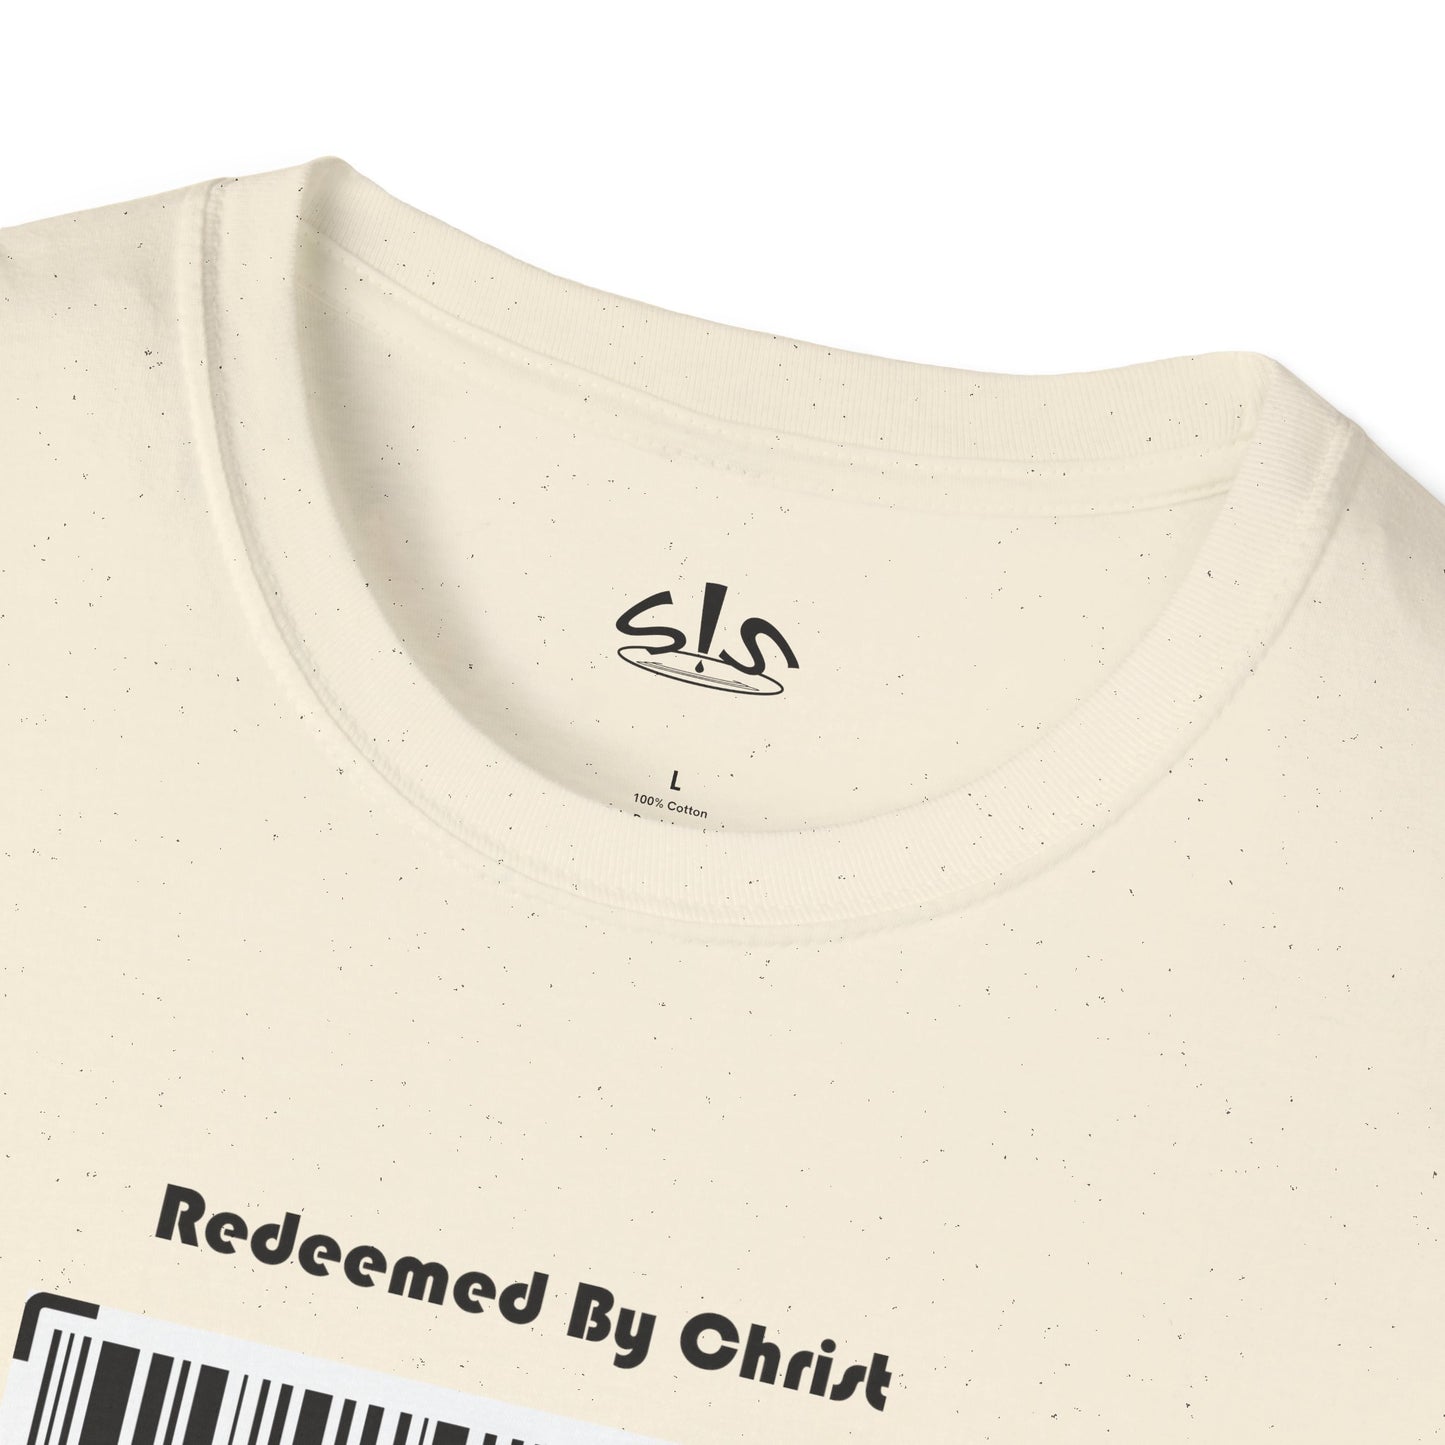 Redeemed by Christ (Black) Unisex Softstyle T-Shirt